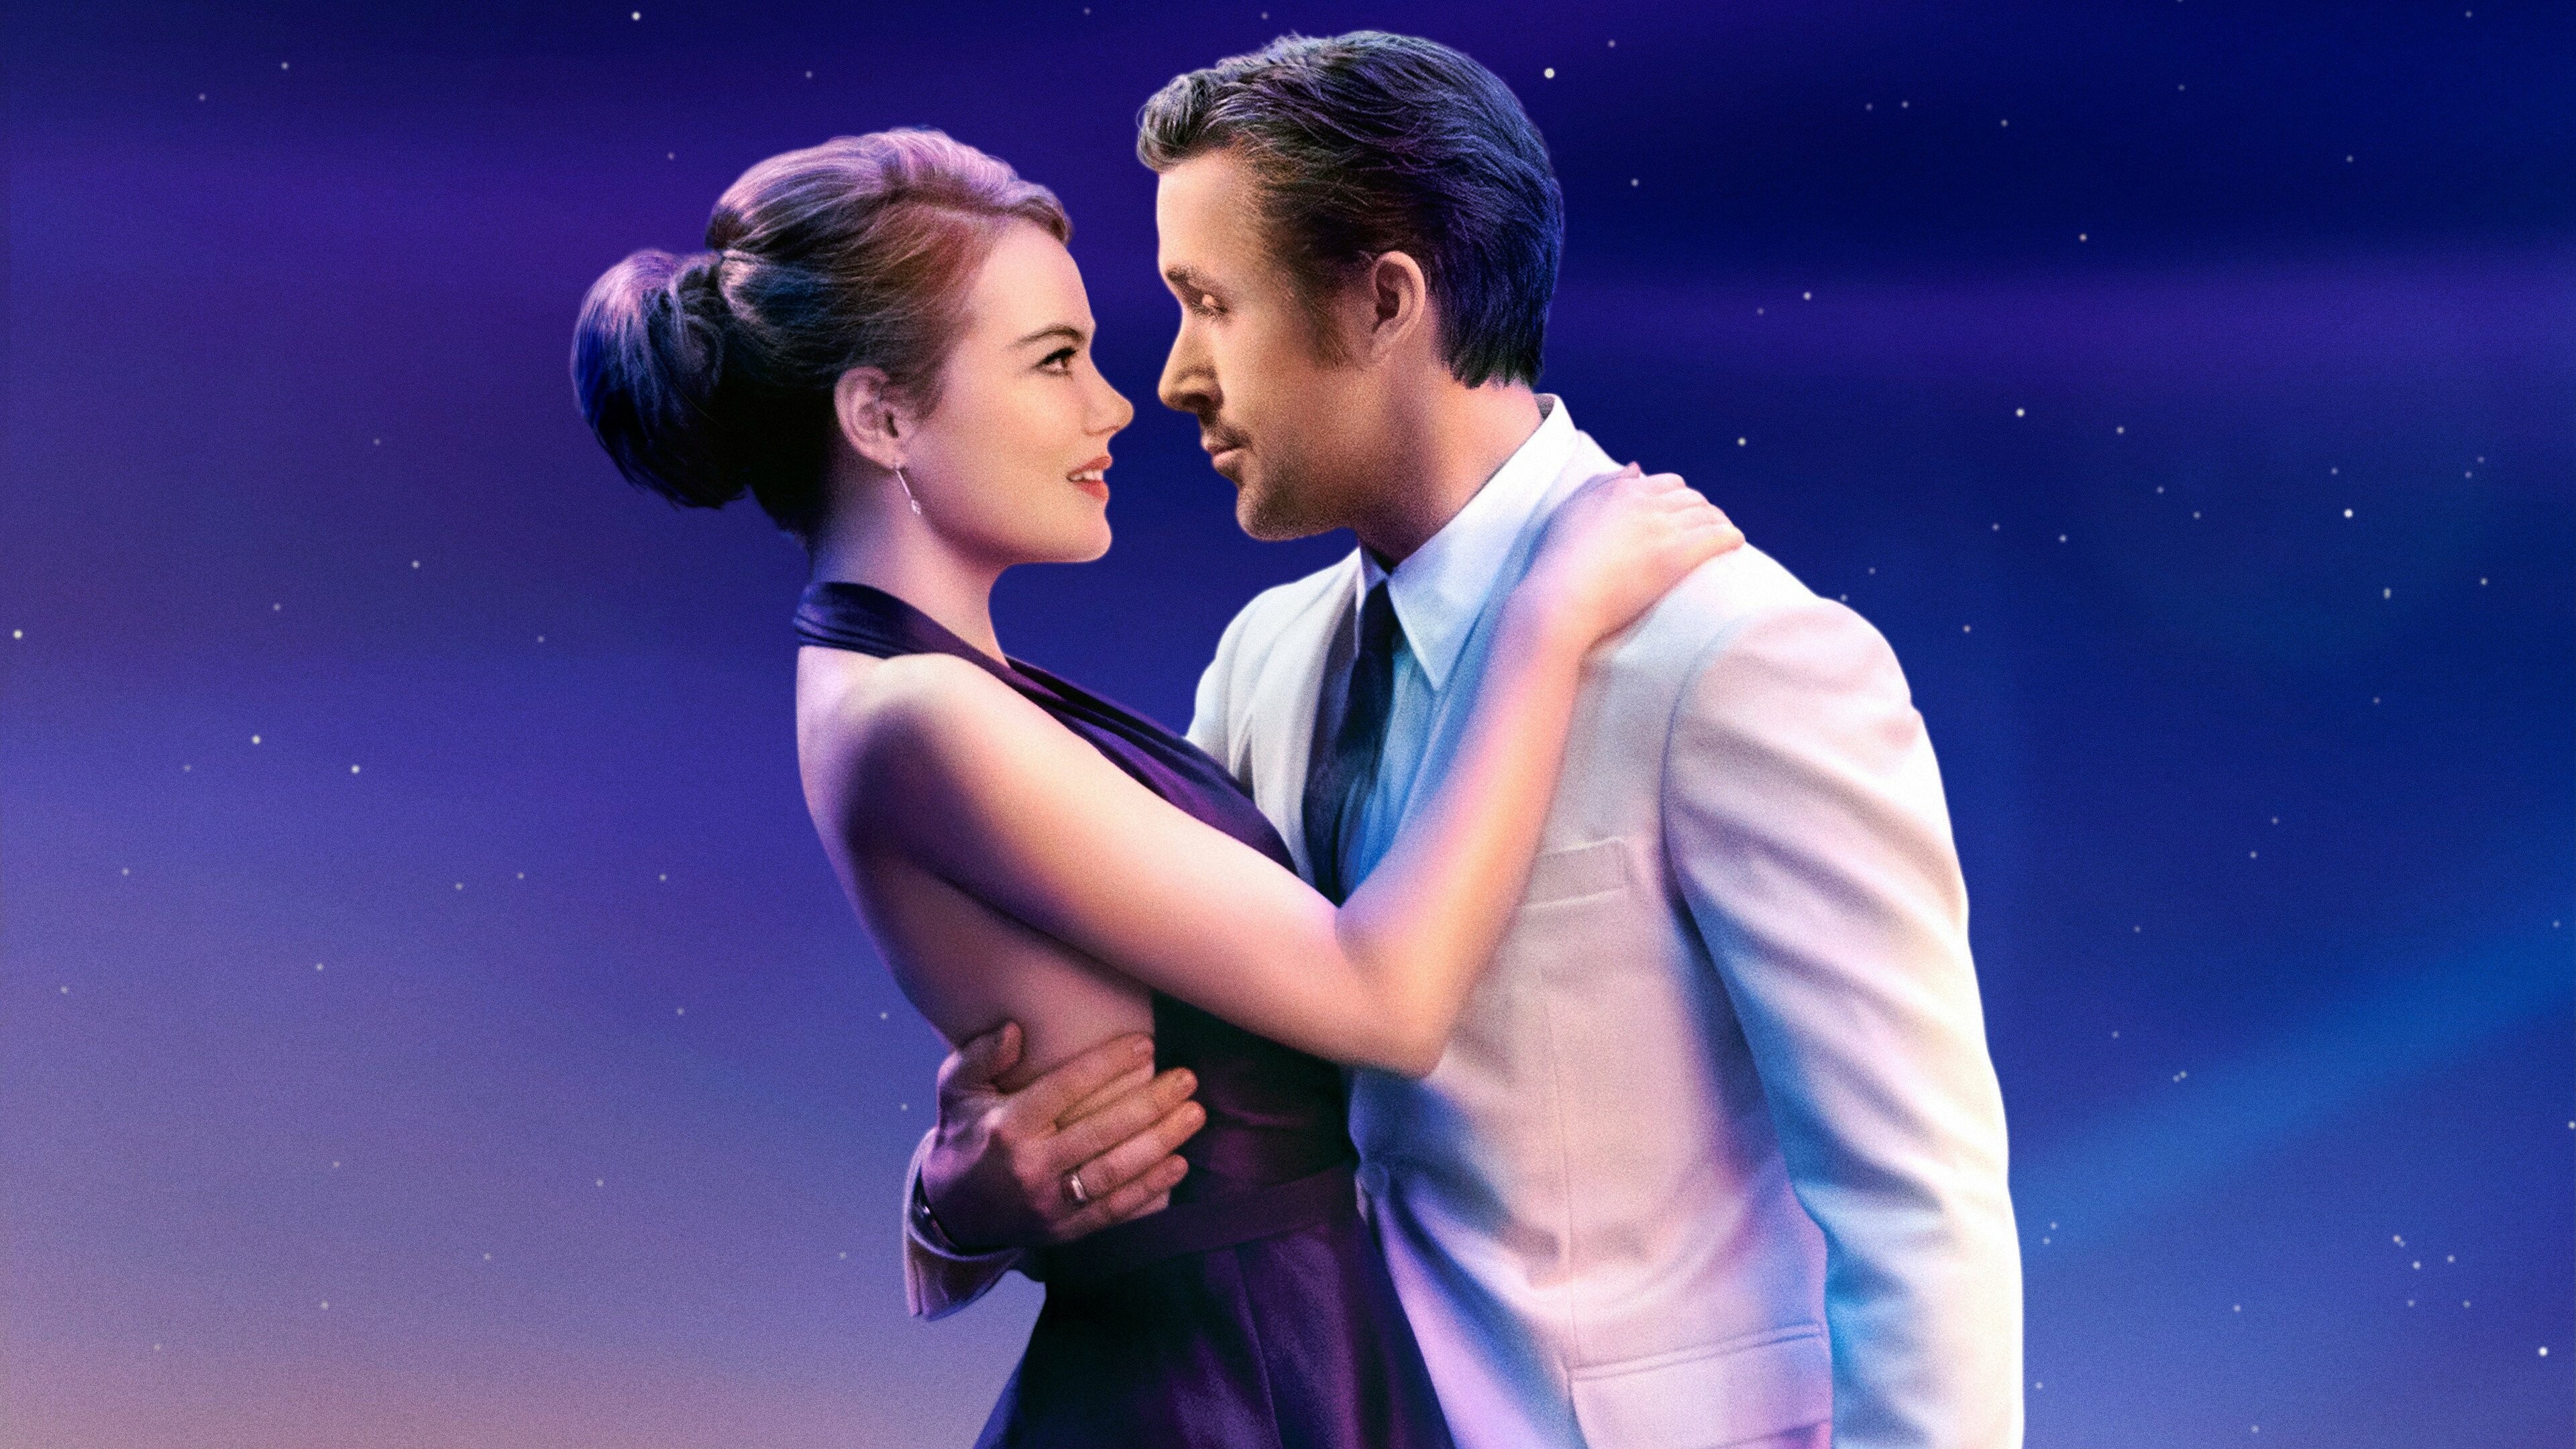 La La Land: When Sebastian, a pianist, and Mia, an actress, follow their passion and achieve success in their respective fields, they find themselves torn between their love for each other and their careers, Musical comedy. 3840x2160 4K Background.